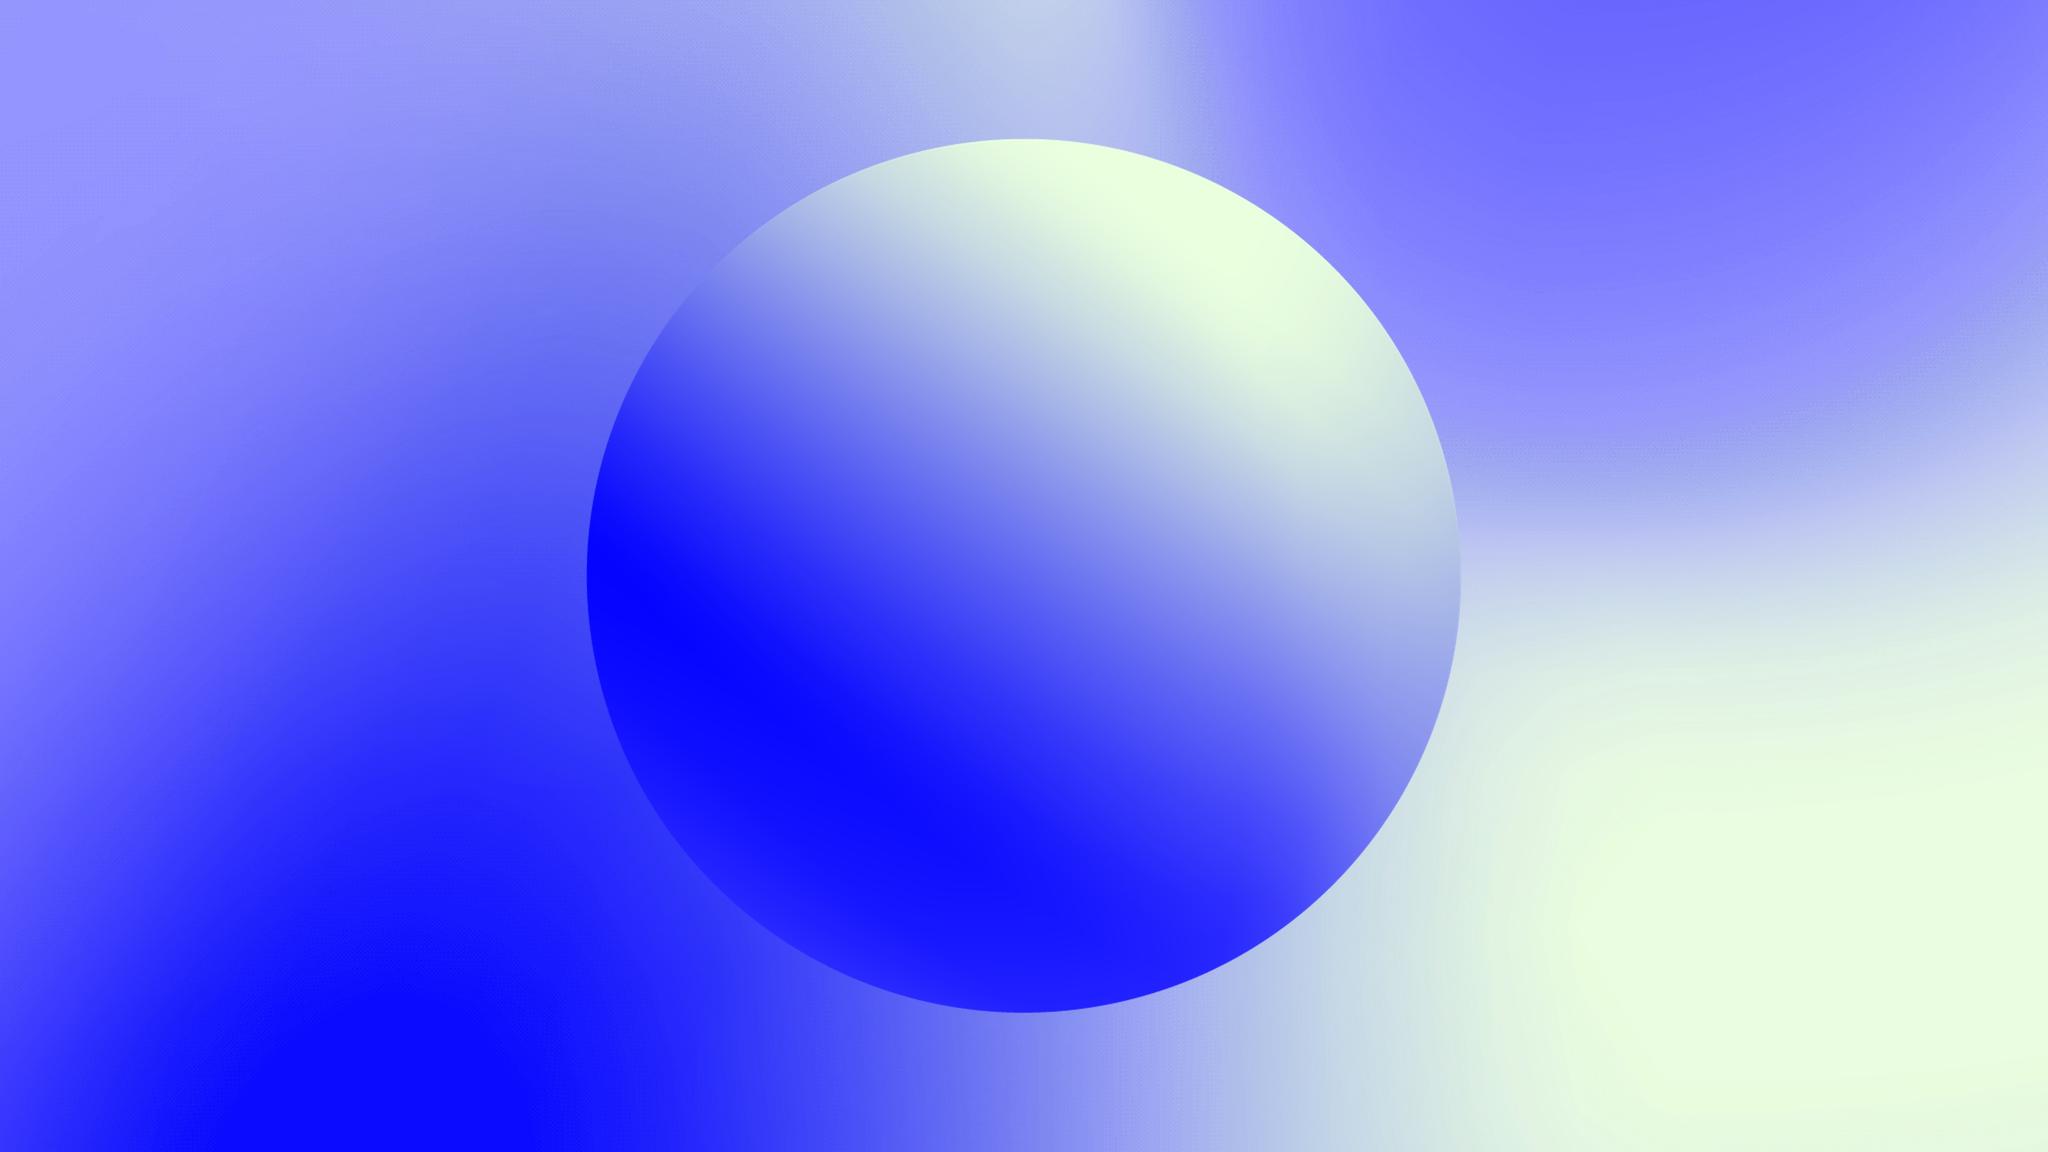 Blue mint gradient background with a circle in the middle which is also in a blue mint gradient